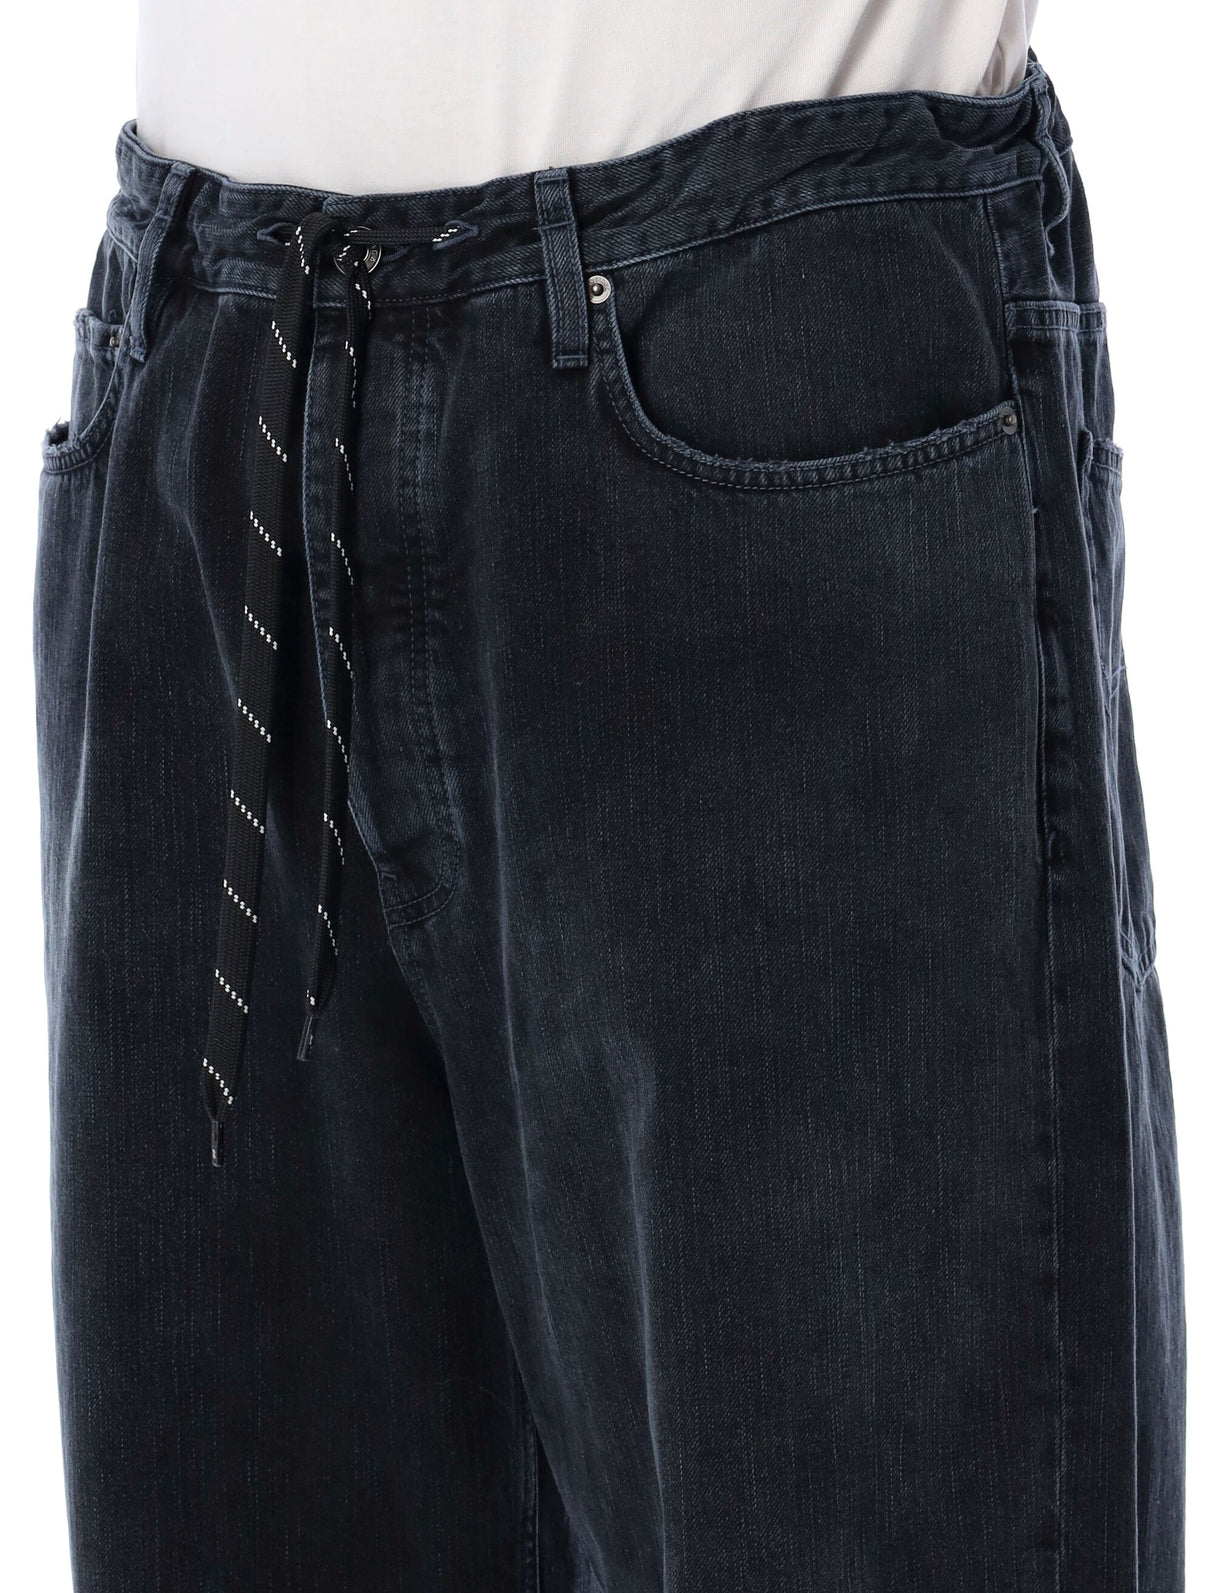 Men's Black Wide-Leg Jeans with Distressed Wash by Balenciaga for SS24